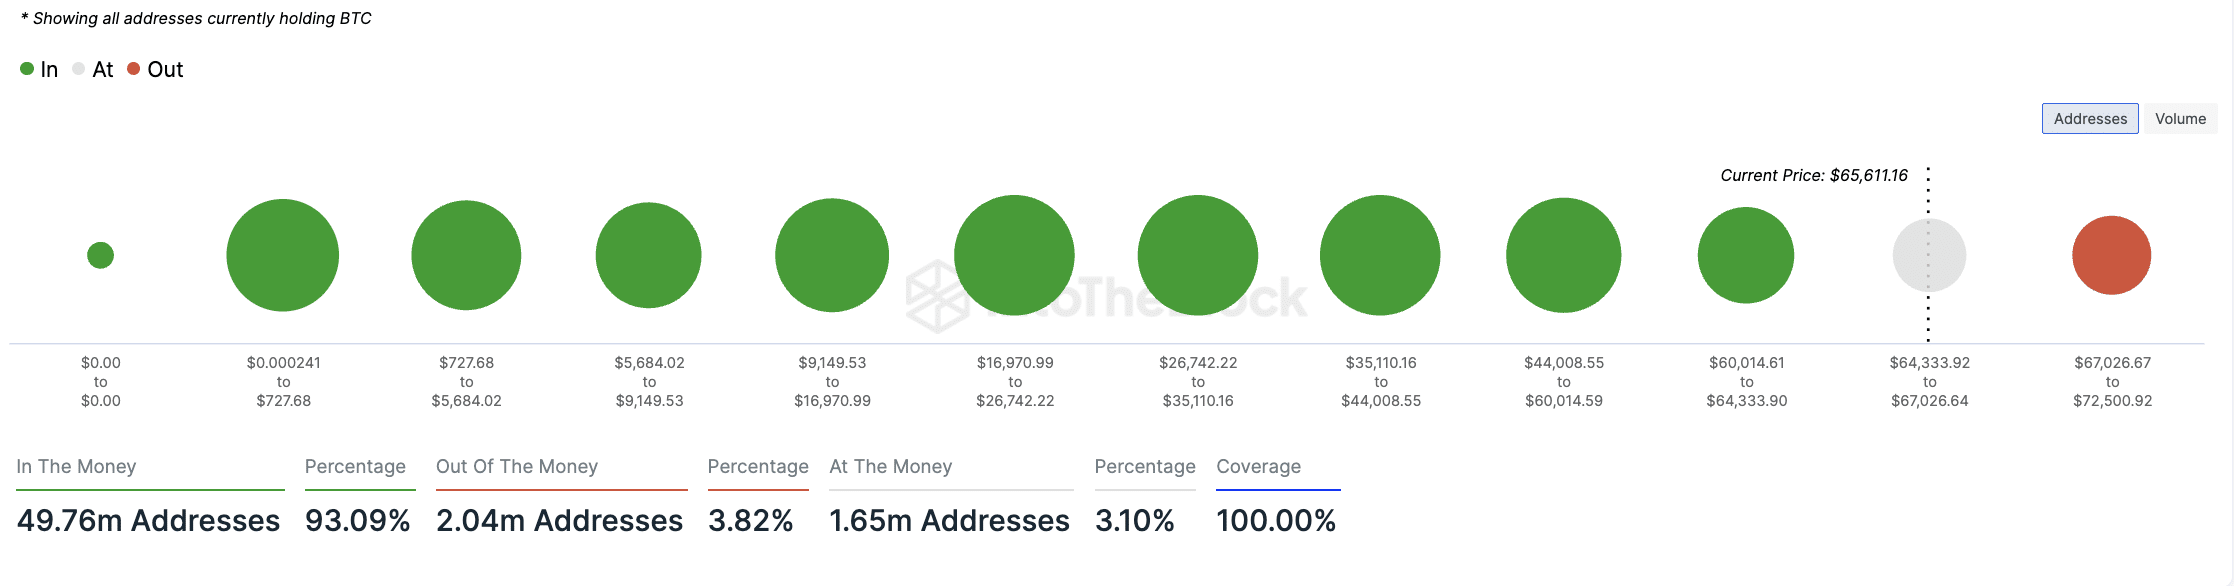 BTC In/Out of the Money